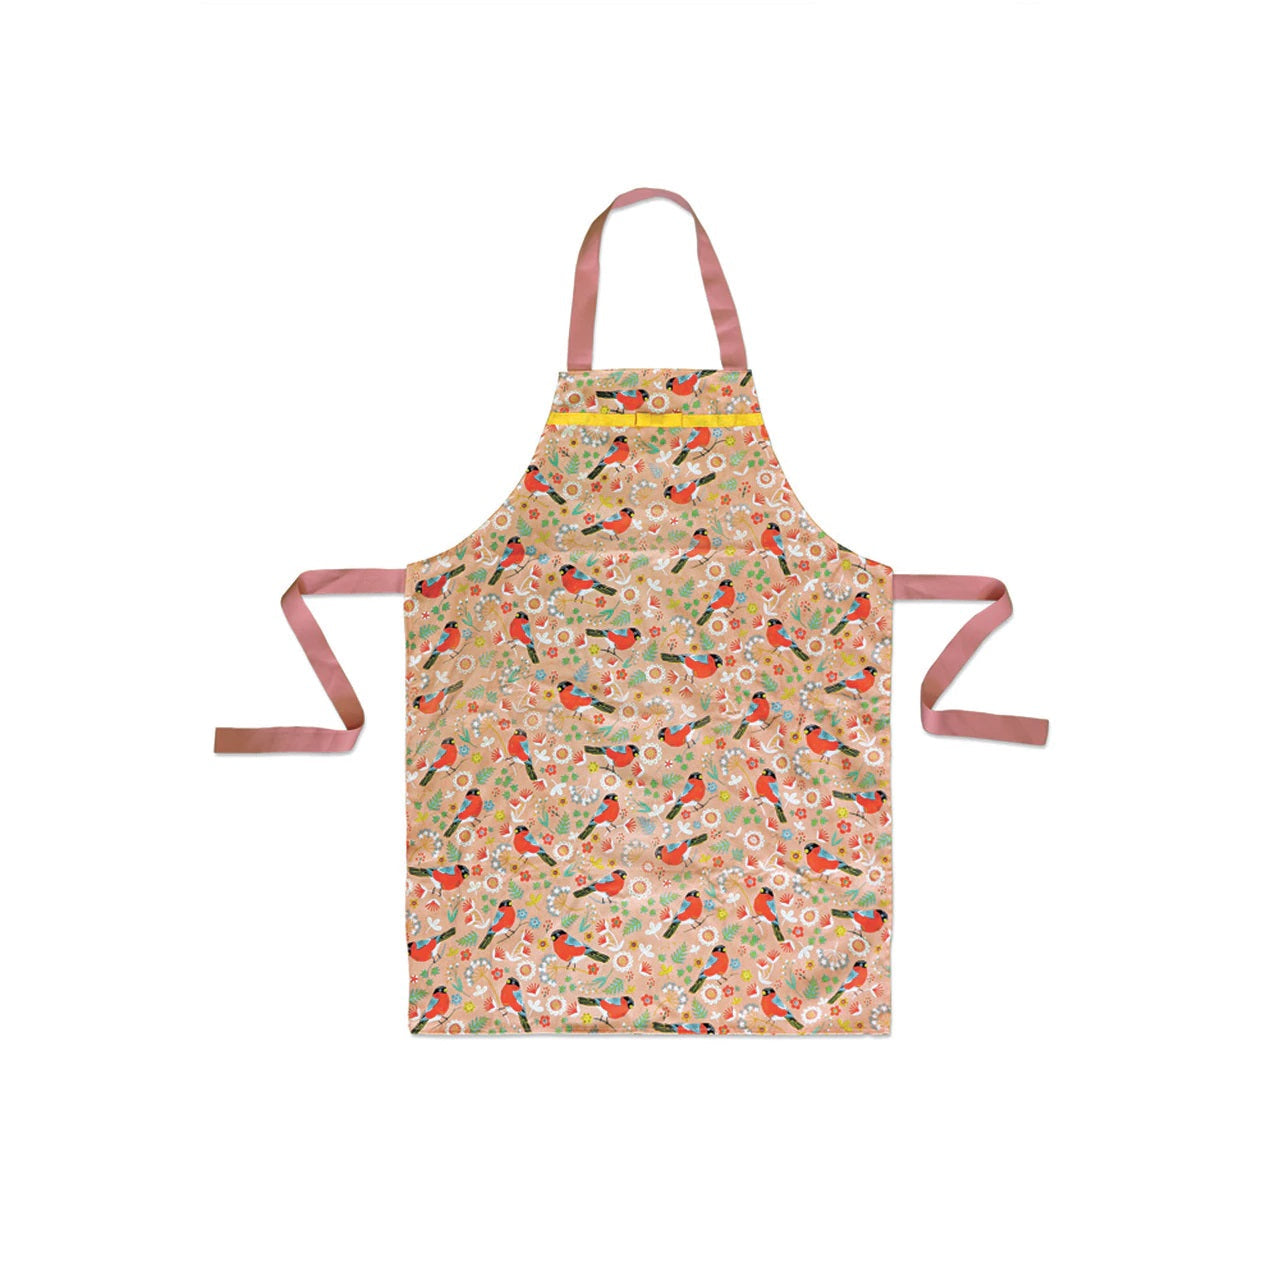 Tipperary Crystal Bullfinch Birdy Apron  New to the Tipperary Crystal Birdy Collection, this plush, Birdy Apron features the exquisite bird illustration and will make a bright and colourful statement in any home.